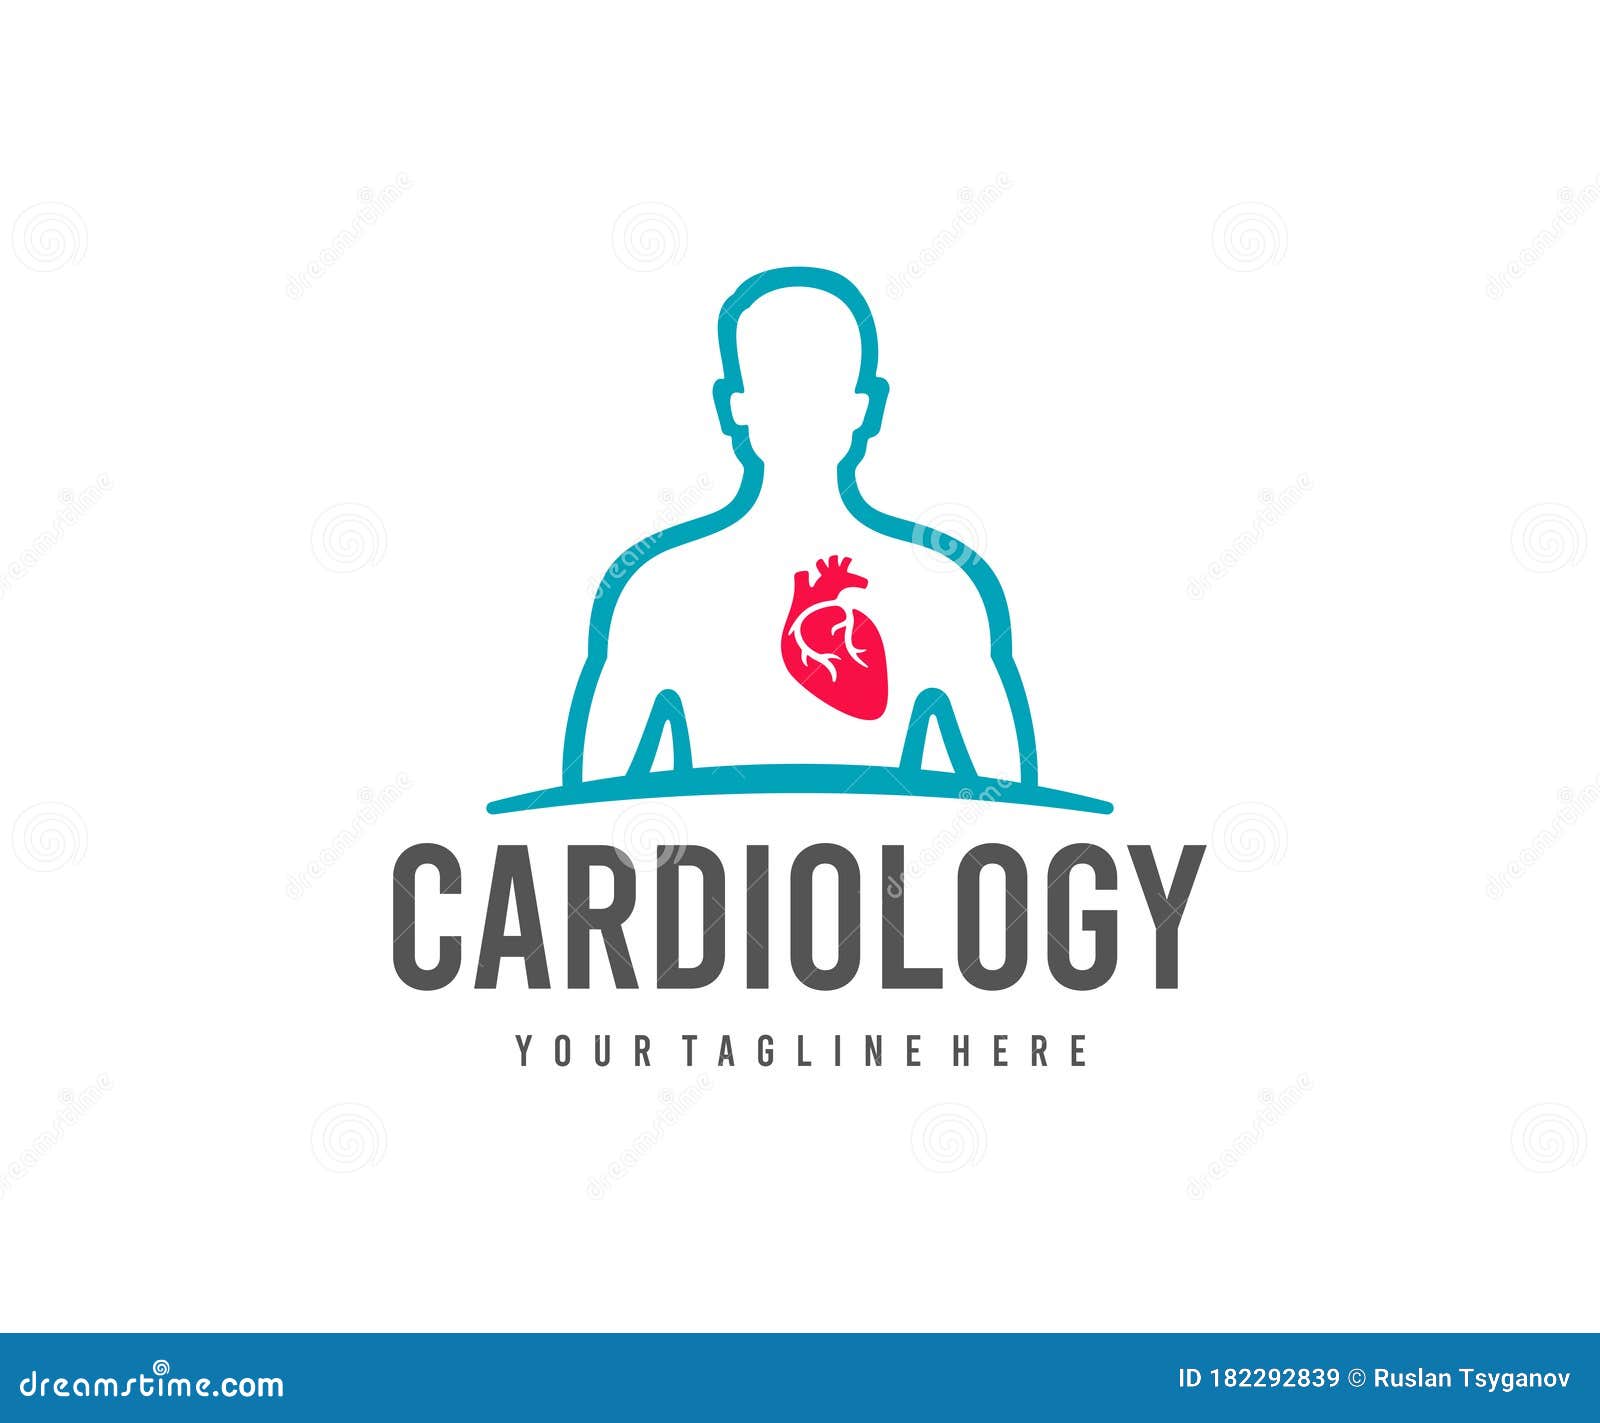 Premium Vector | Cardiology concept vector simple icon or logo isolated,  stereoscope in a shape of heart sign isolated on white.